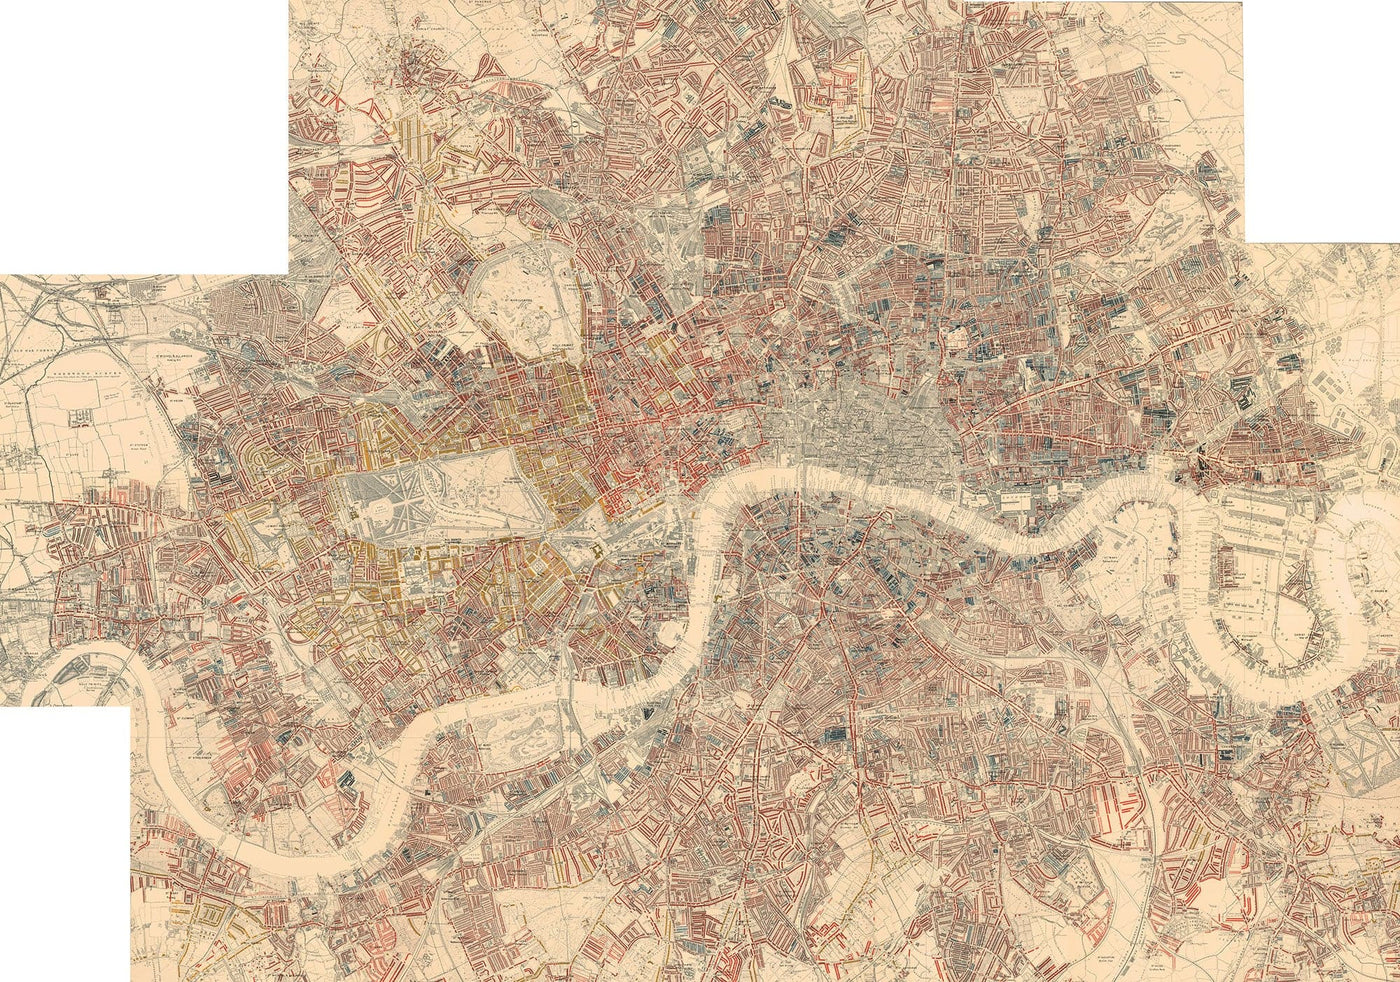 Custom Old Map of London Poverty by Charles Booth, 1898-9